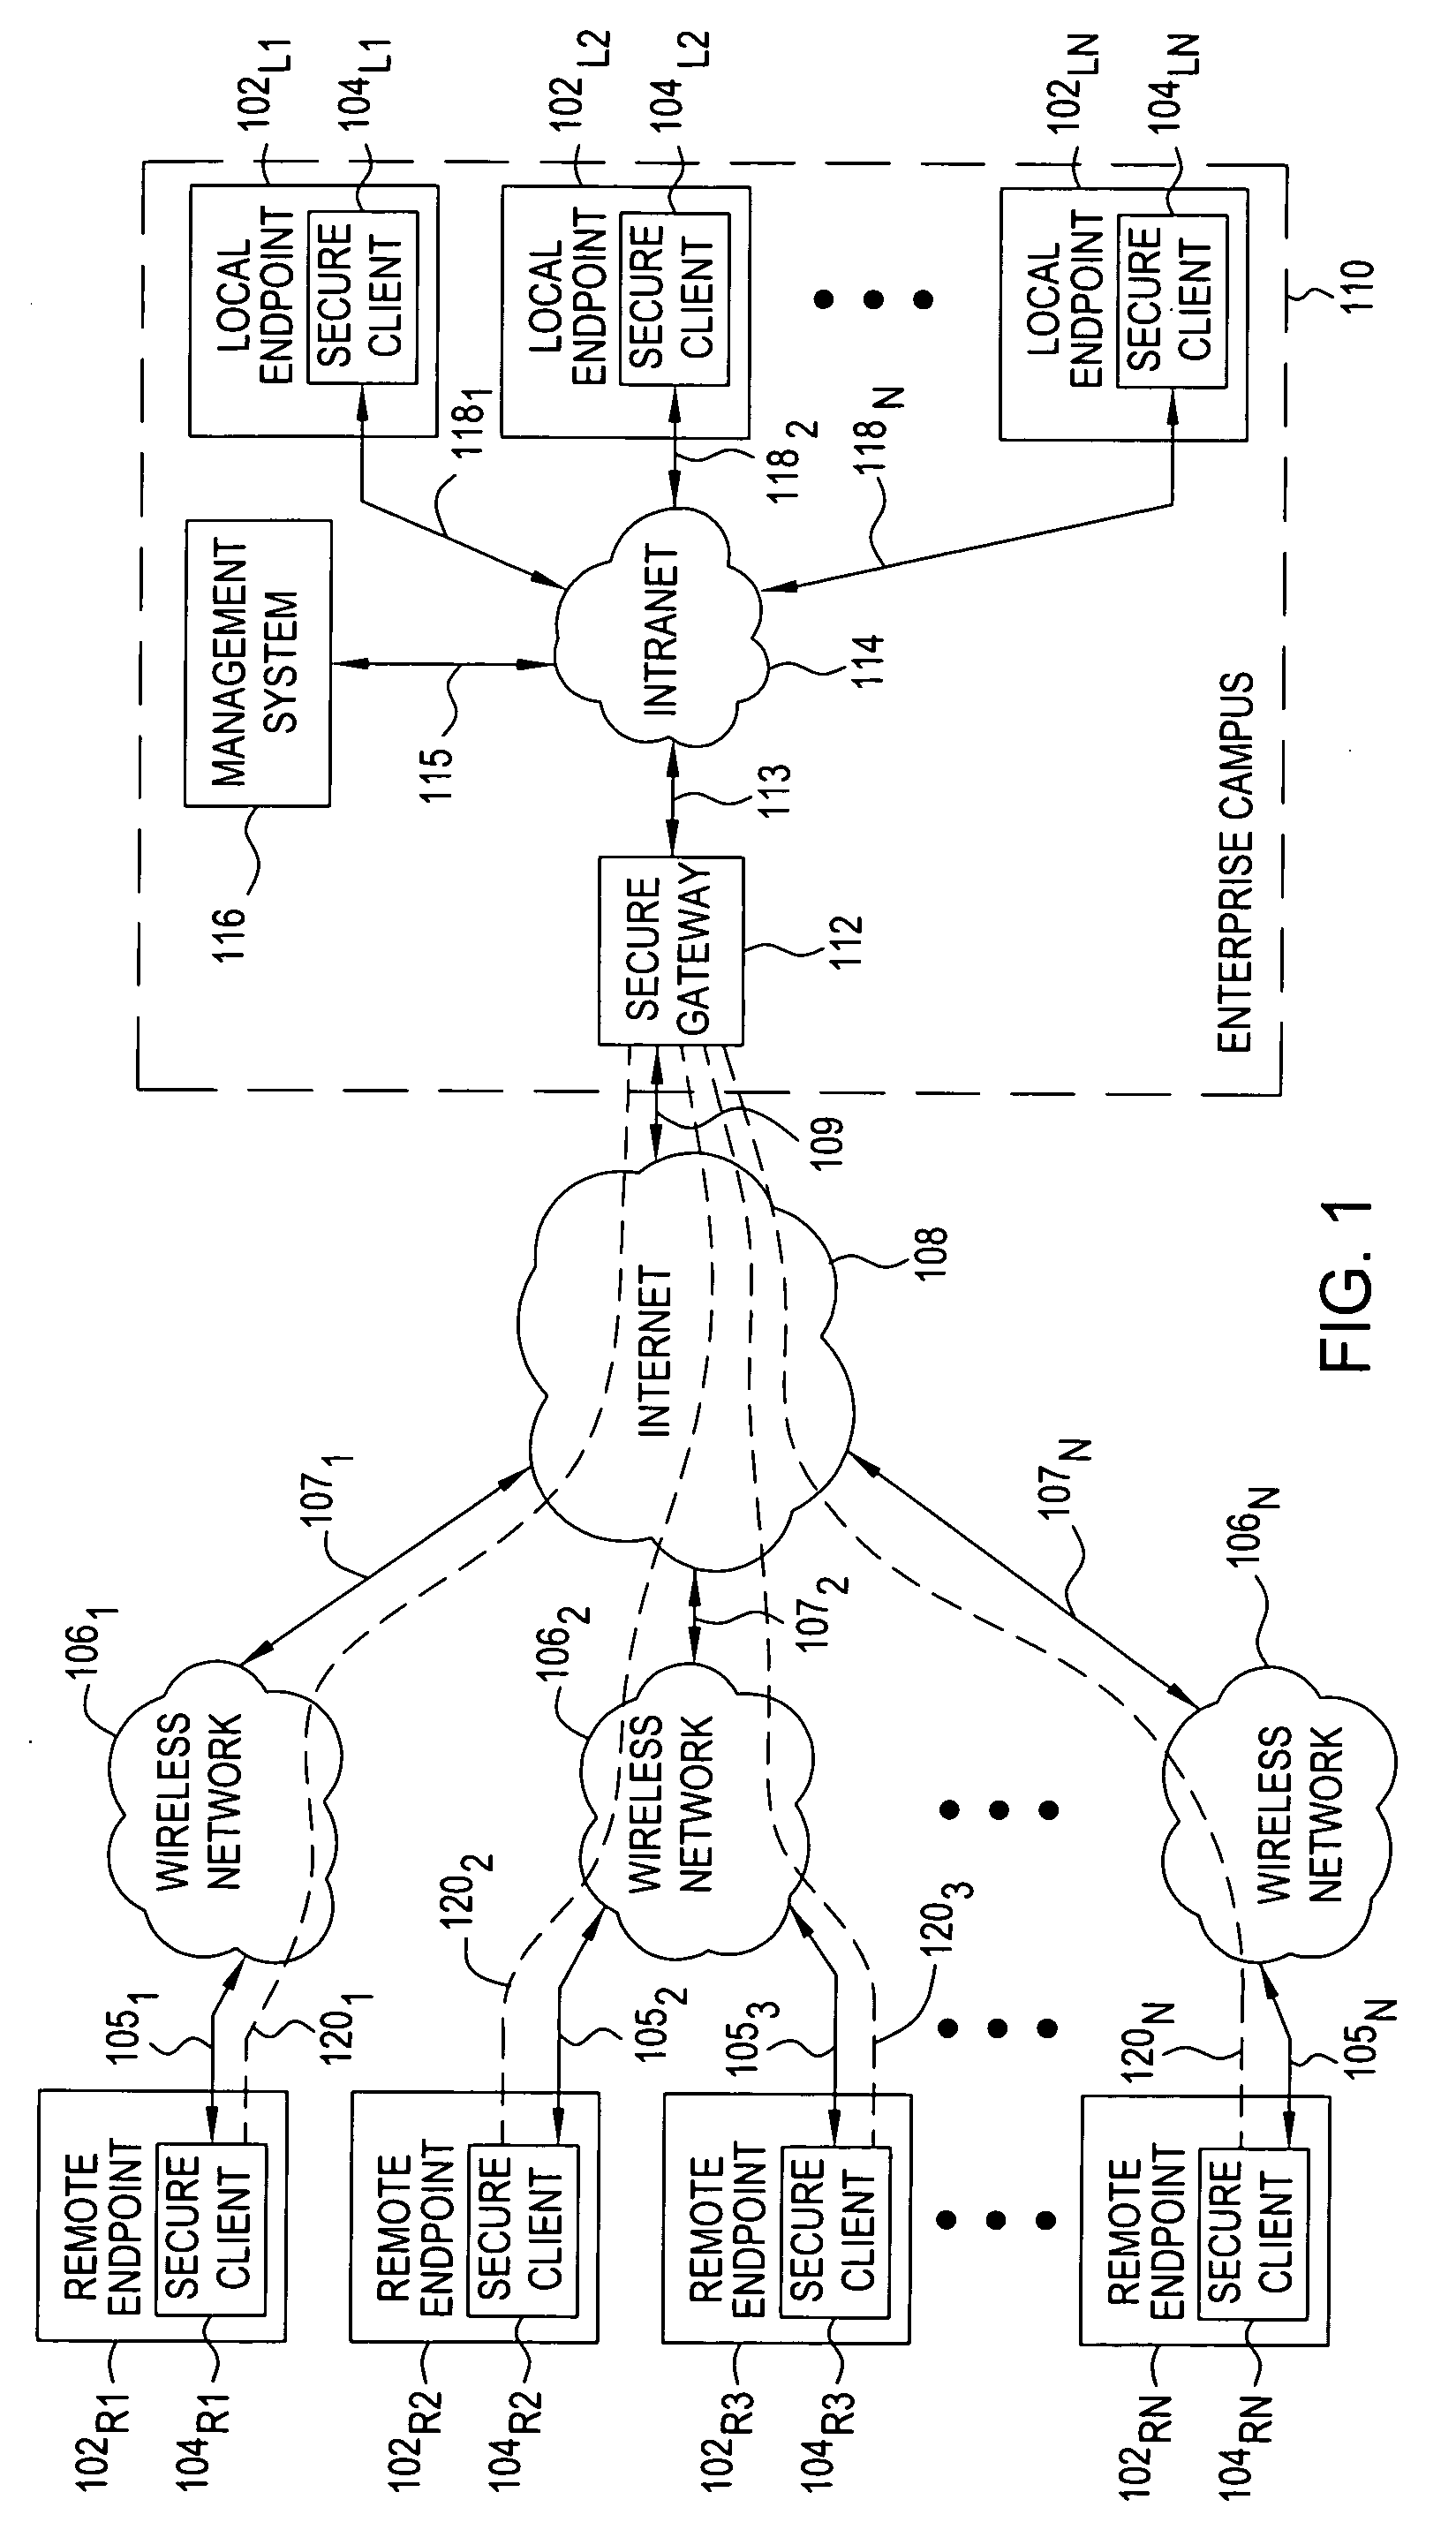 Method and apparatus for providing secure remote access to enterprise networks